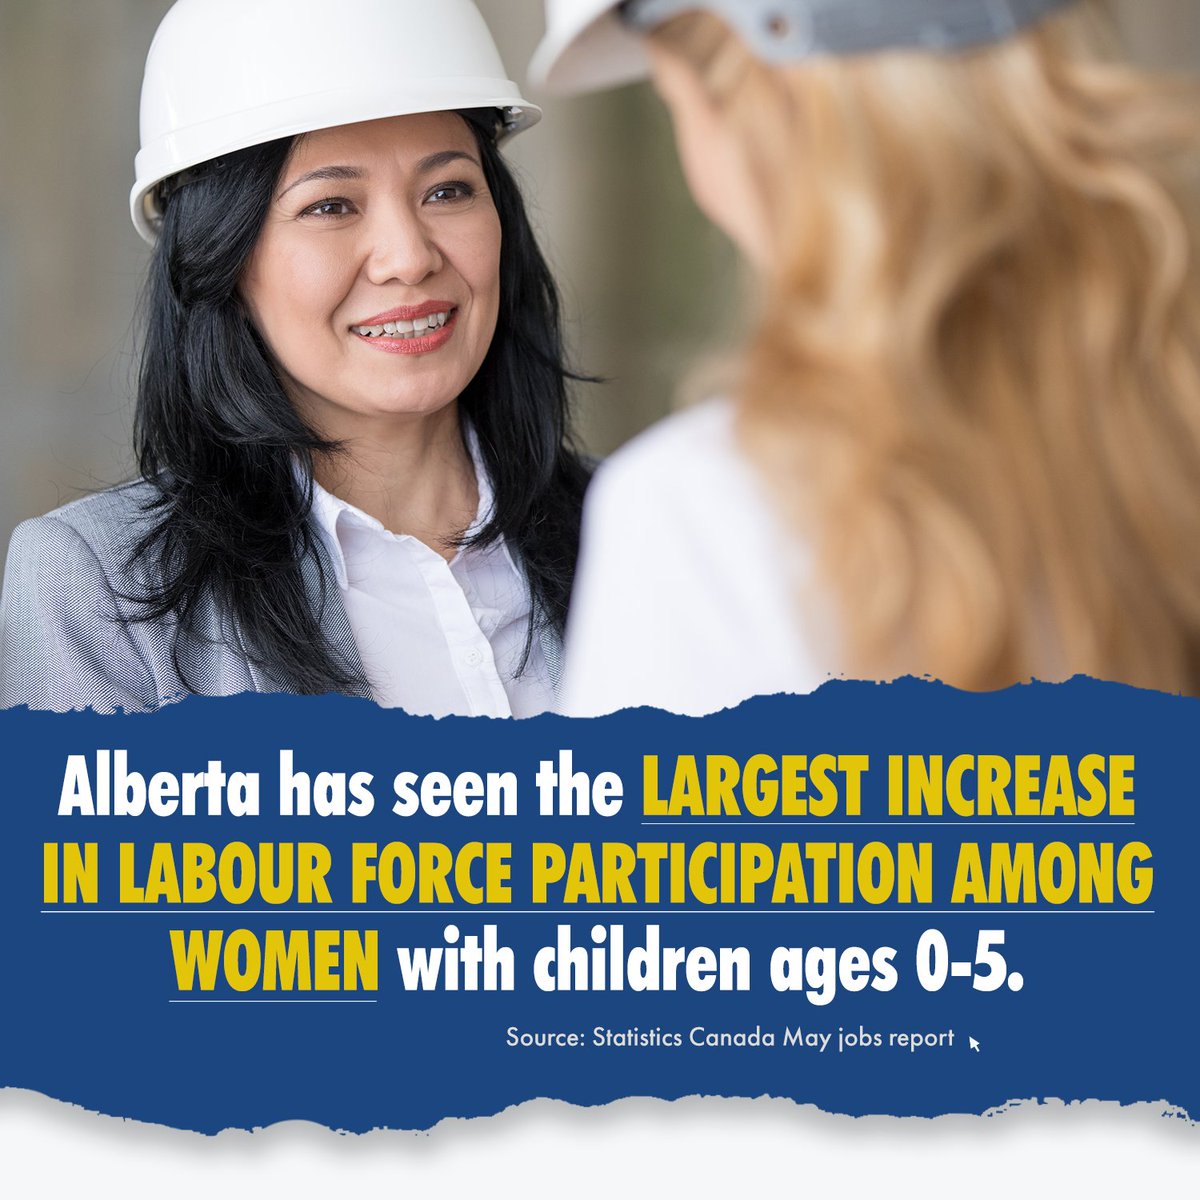 Although the job market cooled in many parts of 🇨🇦 in May - Alberta kept on truckin' 🛻

✅ 3,900 new jobs
✅ Falling unemployment, including in #yyc
✅ The largest increase in labour force participation among women with children ages 0-5 in 🇨🇦

#ableg #abpoli #abbiz #yycbiz